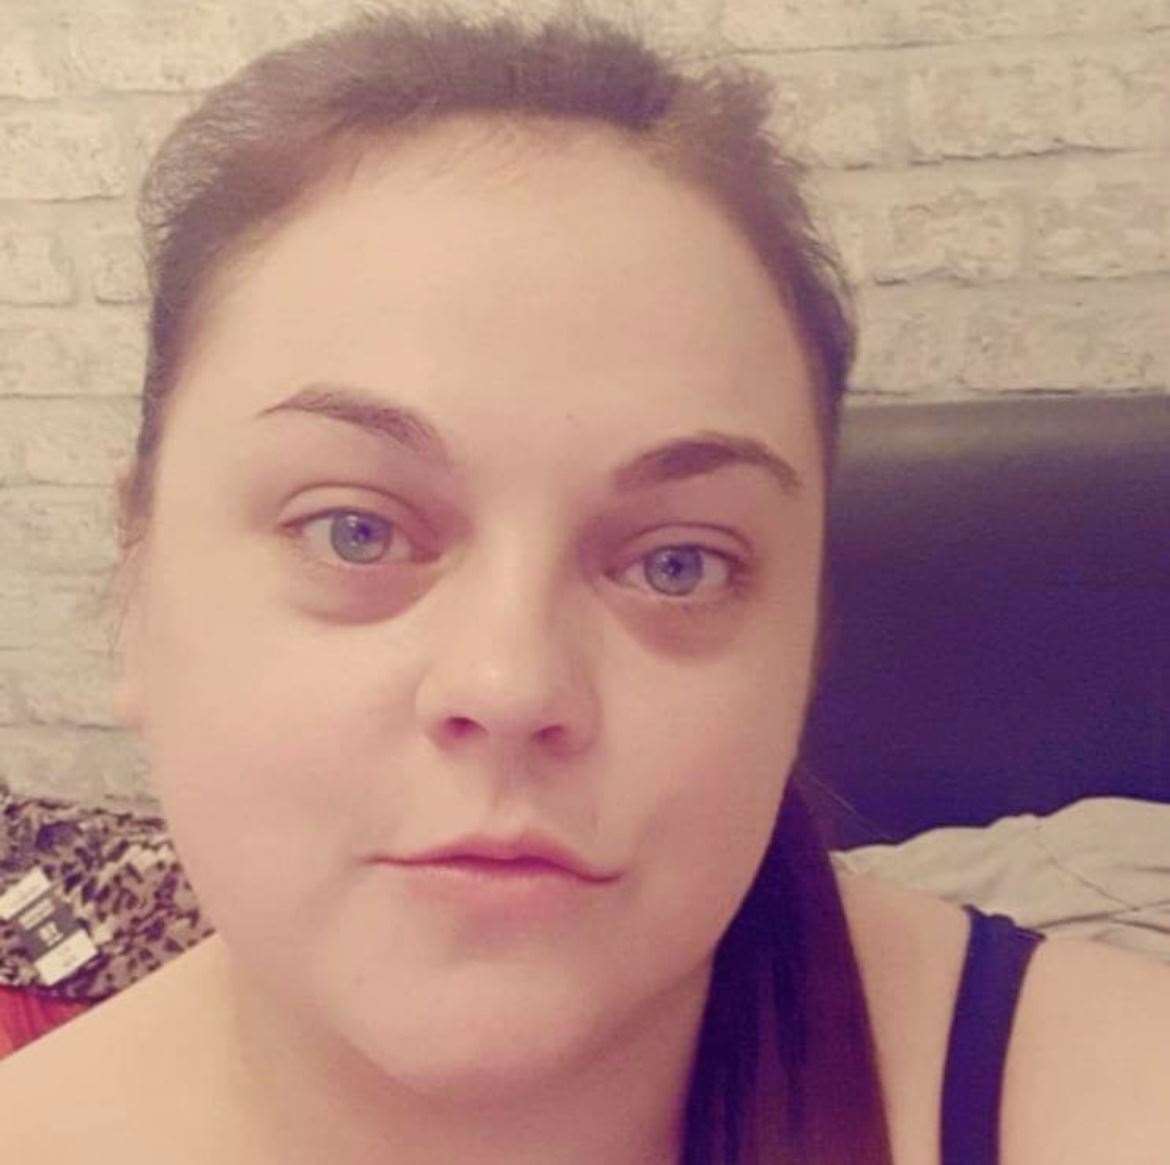 Maidstone woman Sarah Tansley, 31, died after consuming a mixture of medication and morphine. Picture: Instagram